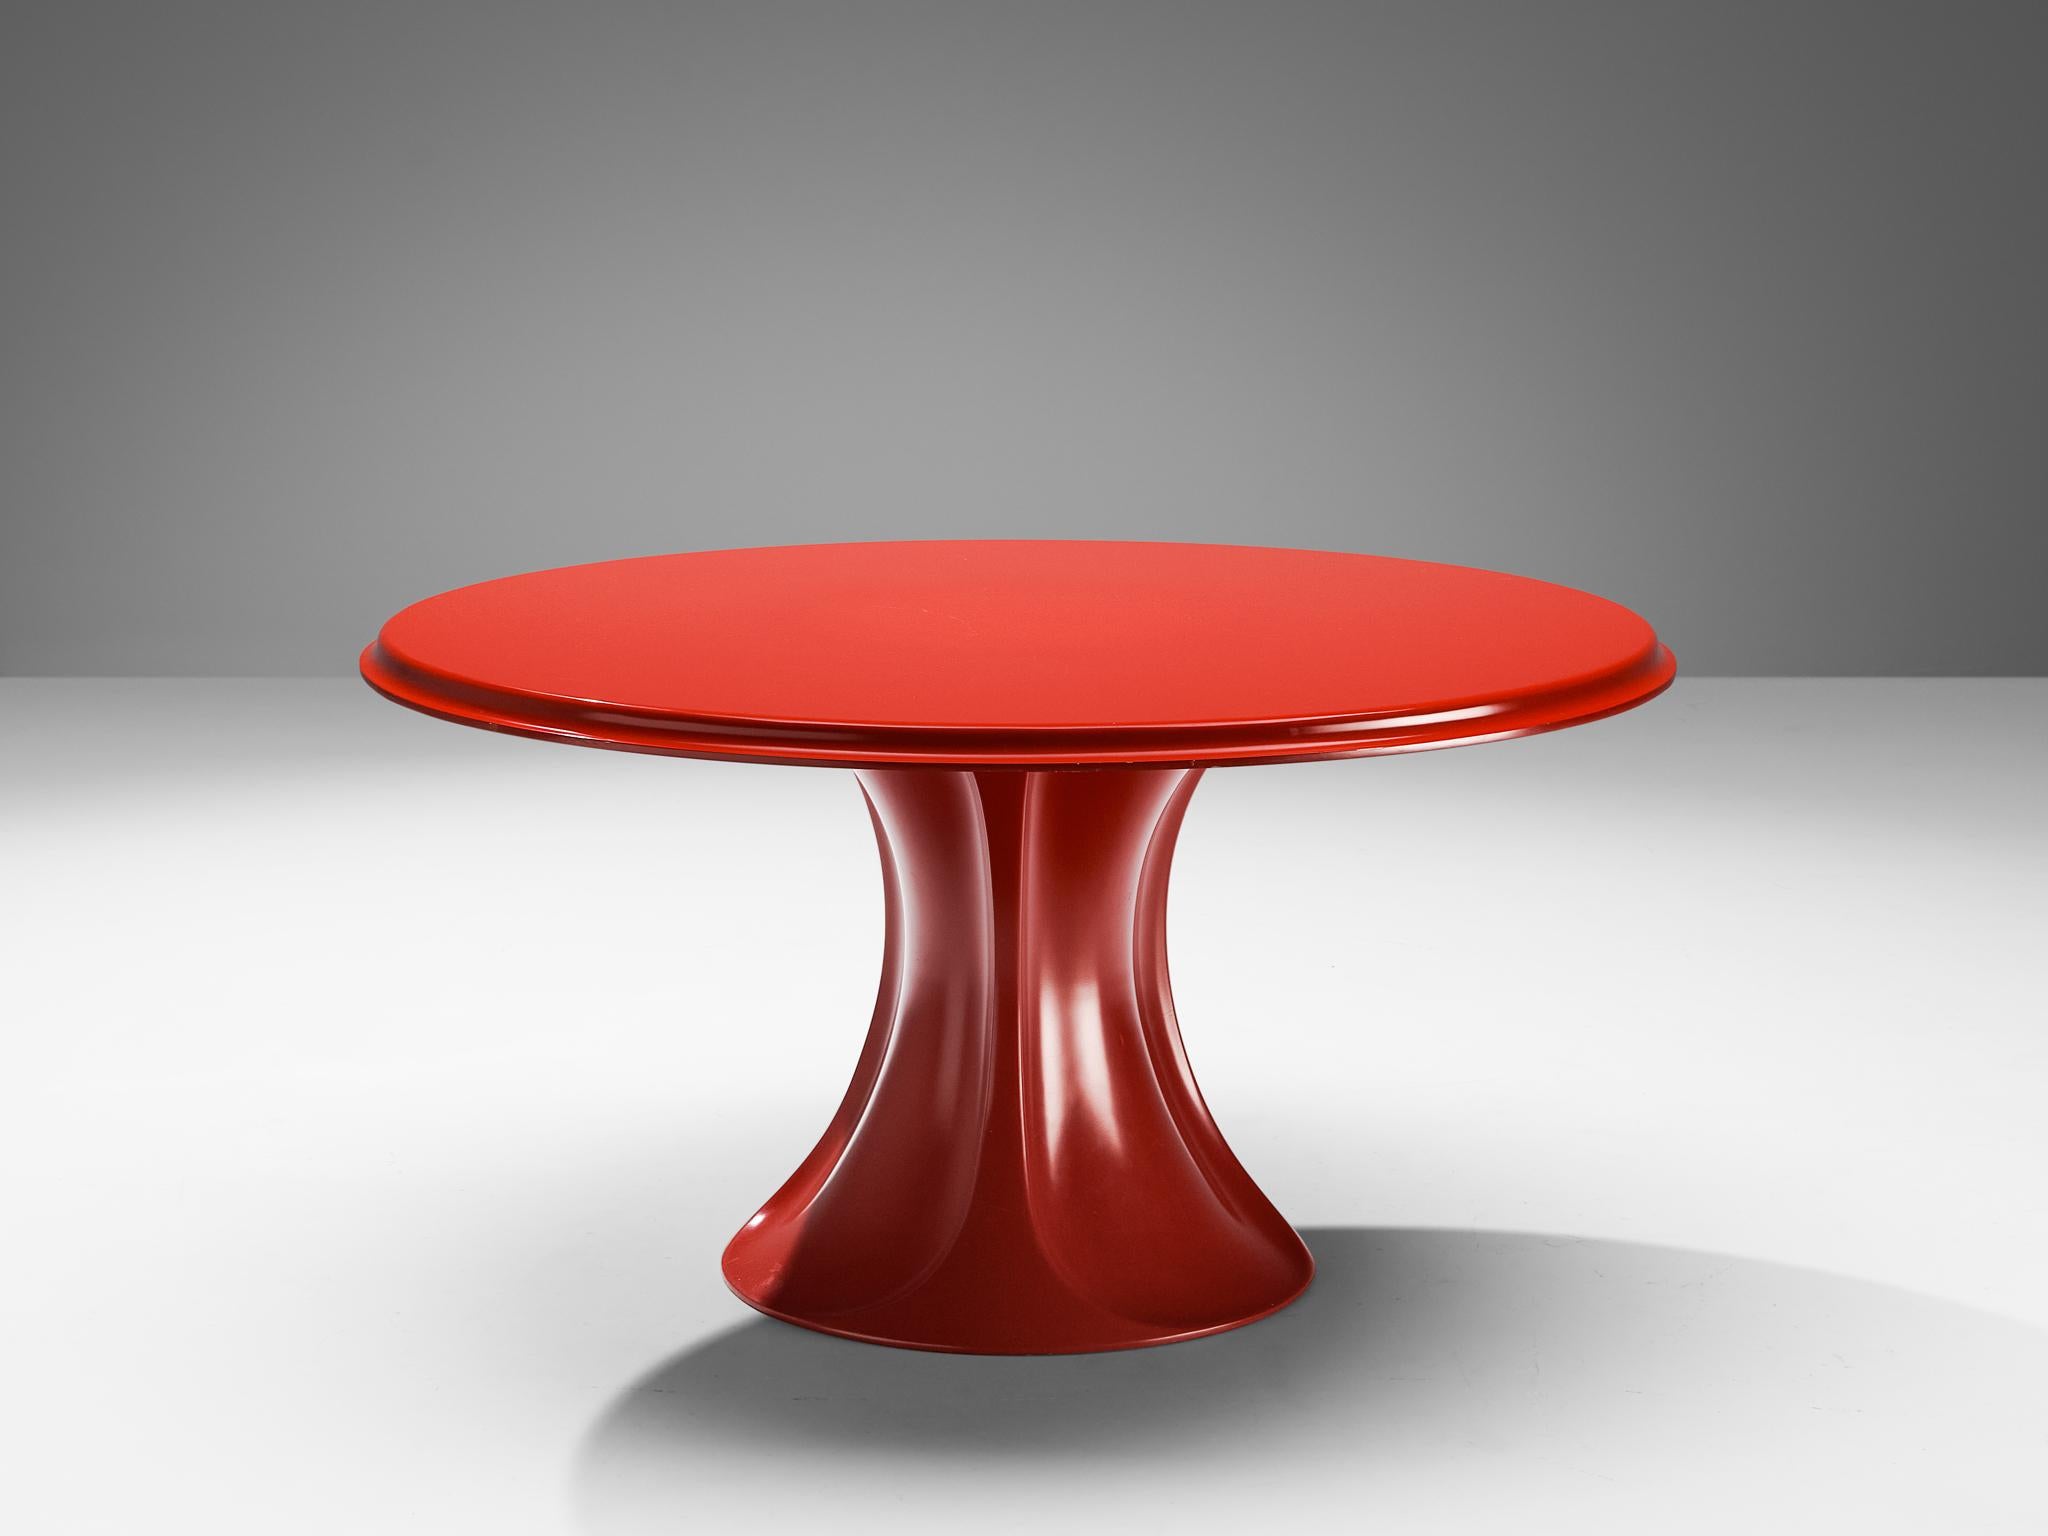 Pierluigi Spadolini for 1P, 'Boccio' dining table, polyurethane resin, Italy, 1972

This dining or center table is designed by Italian architect and designer (1922-2000) Pierluigi Spadolini for 1P. In the 1960s and 1970s, there was an explosion of